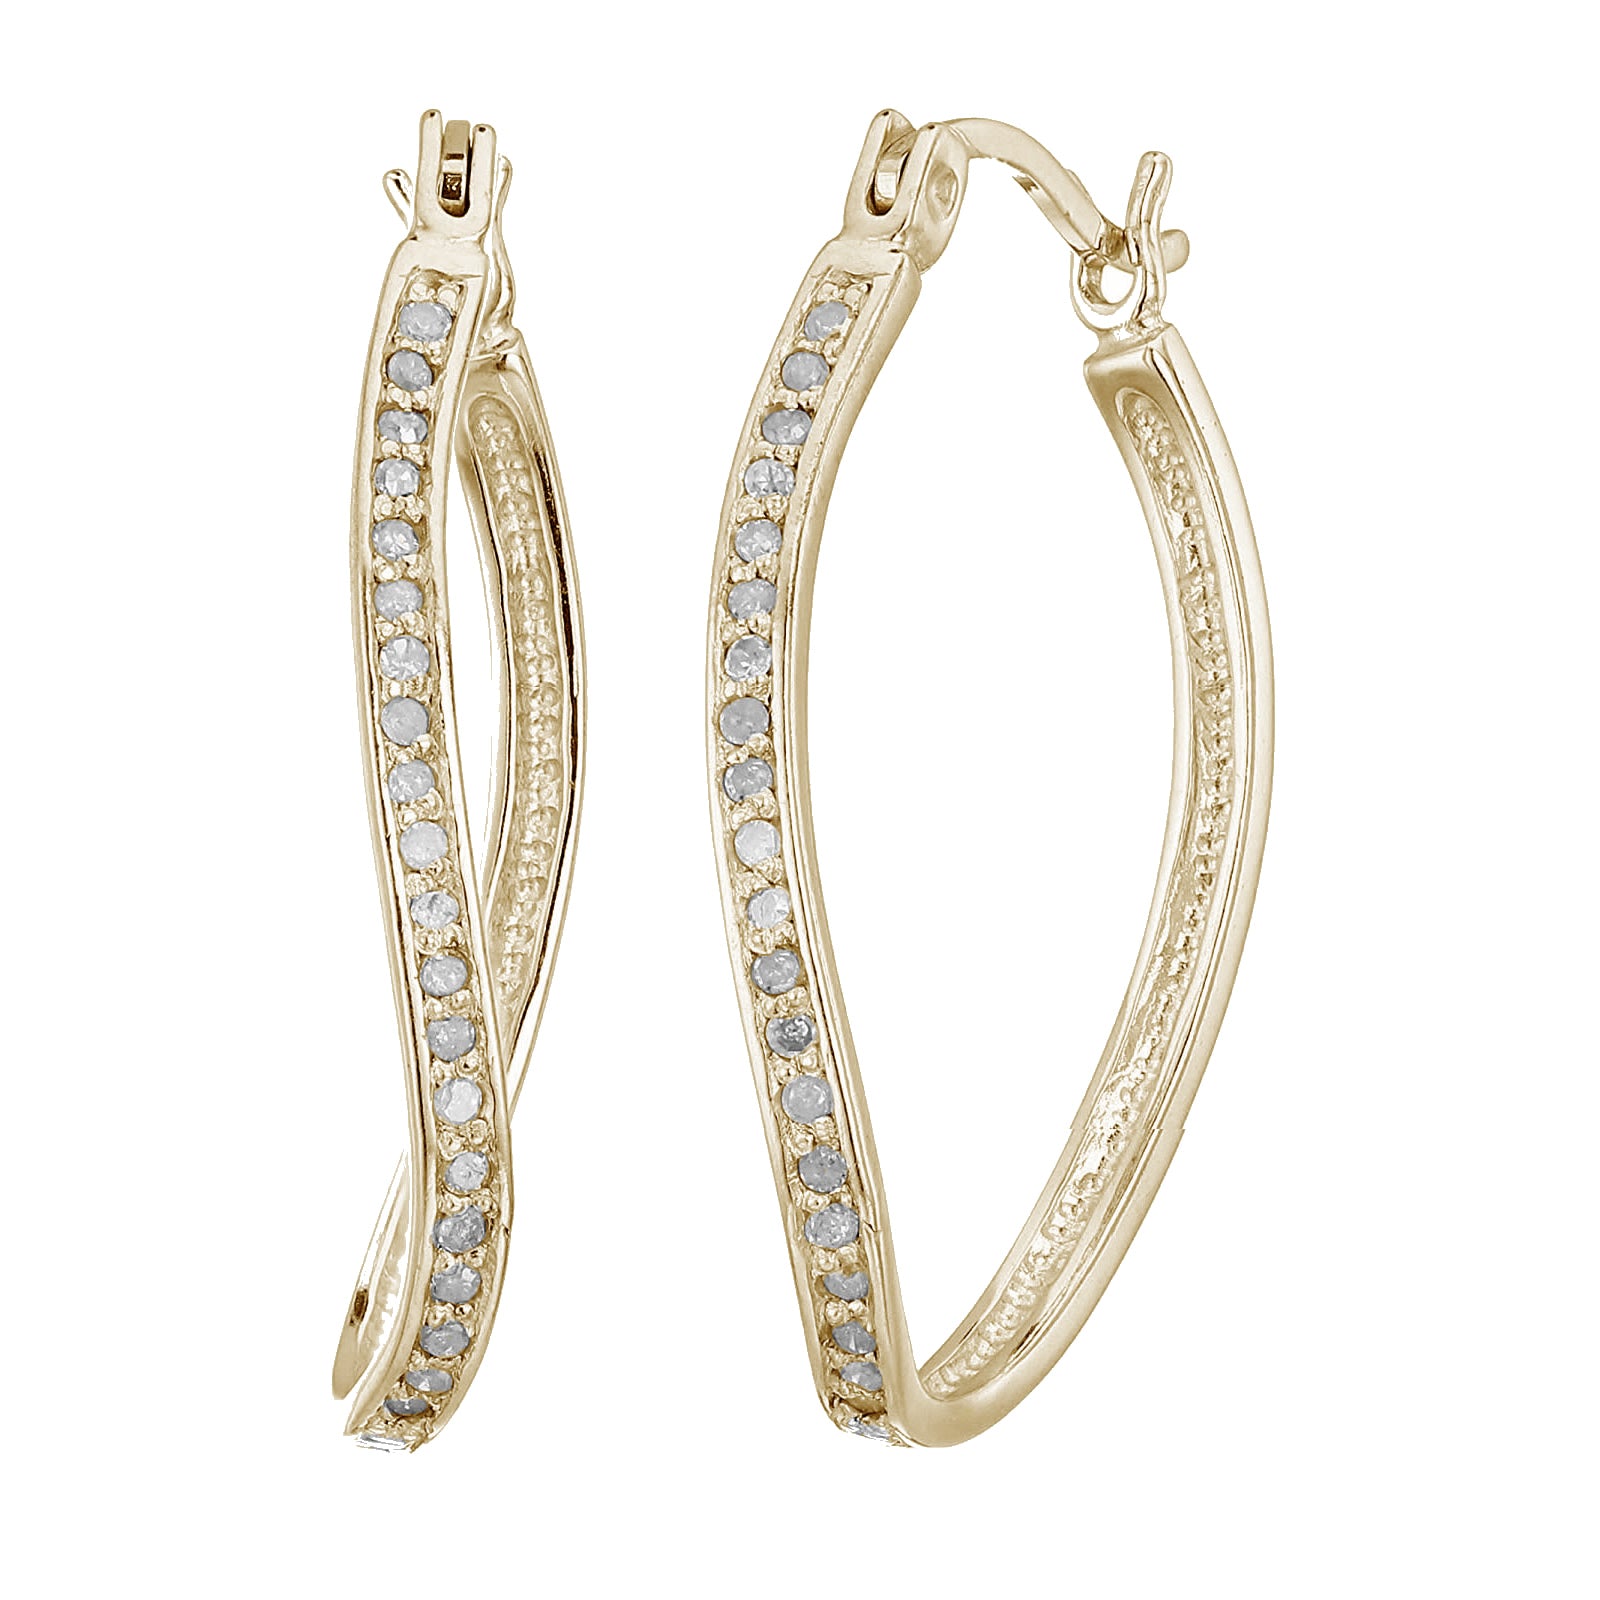 1/4 cttw Diamond Hoop Earrings Yellow Gold Plated over .925 Silver 1 Inch